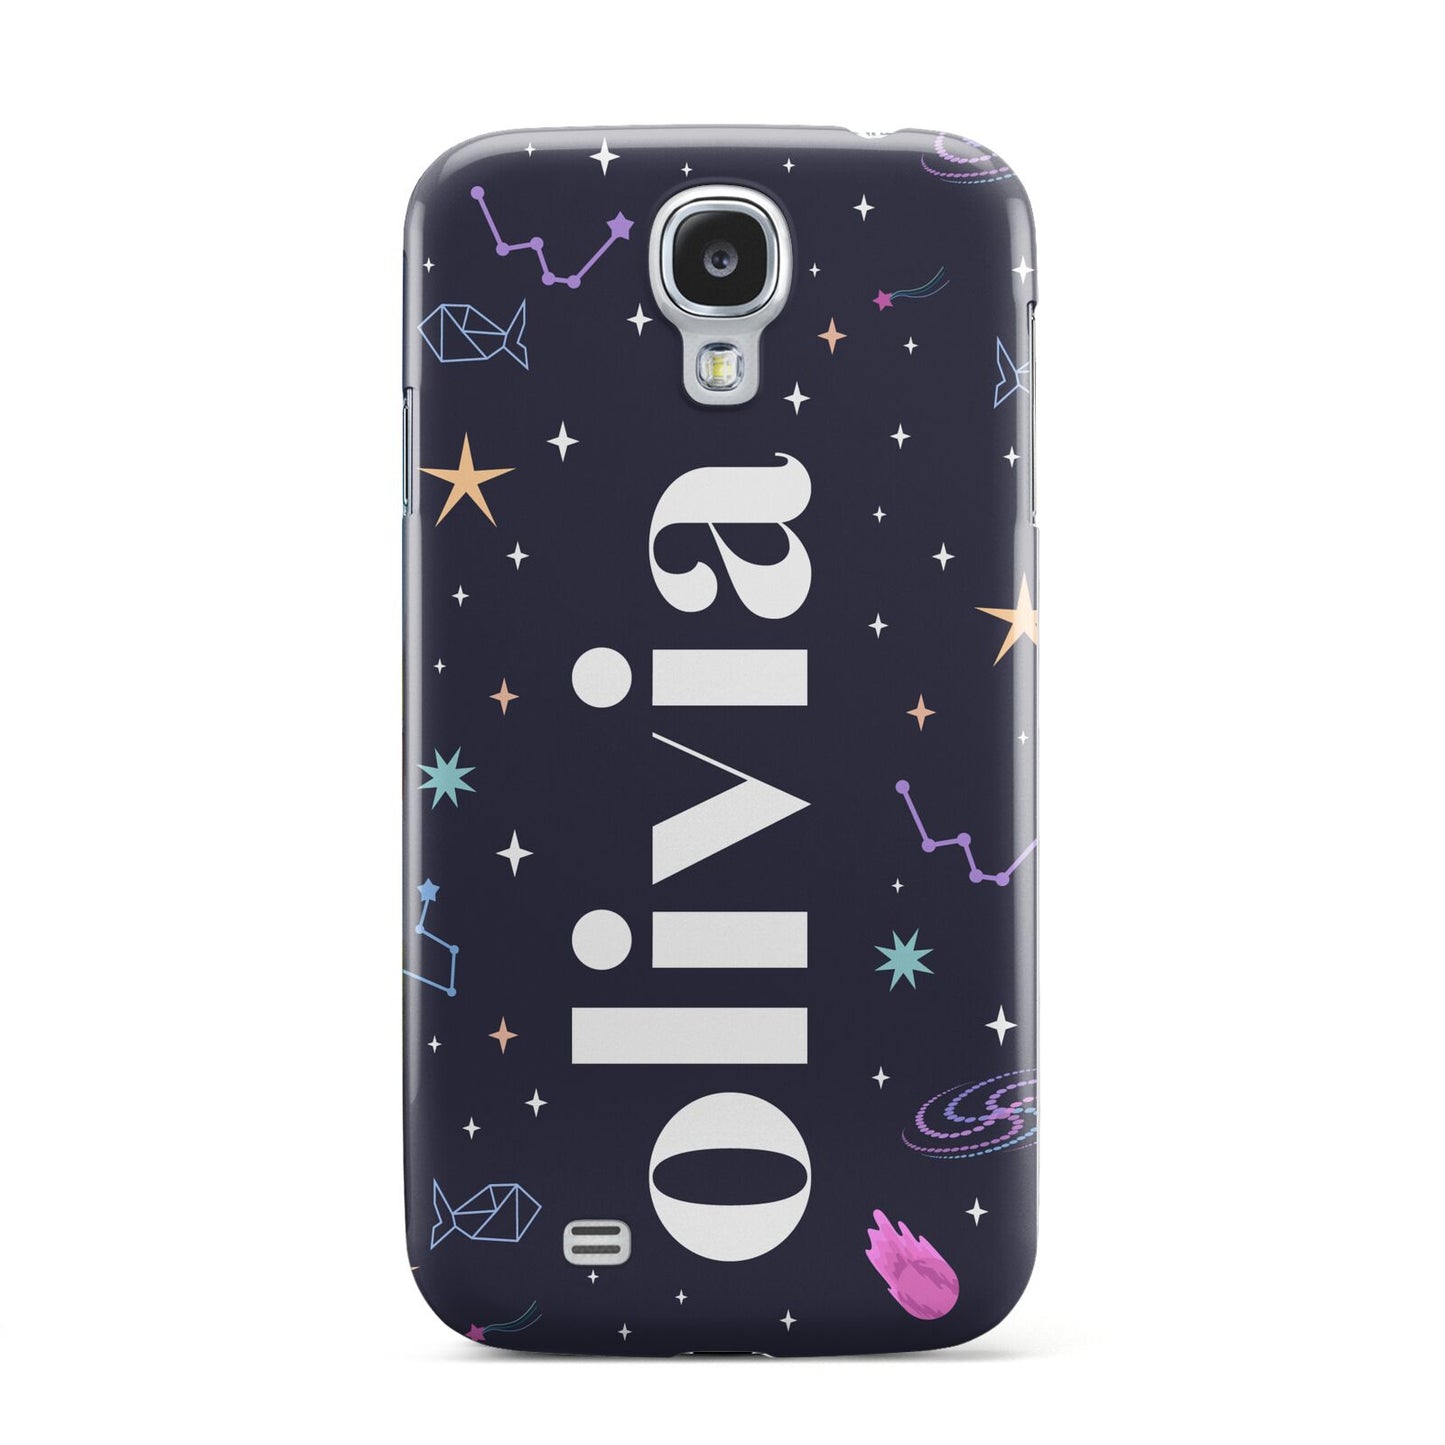 Funky Starry Night Personalised Name Samsung Galaxy S4 Case